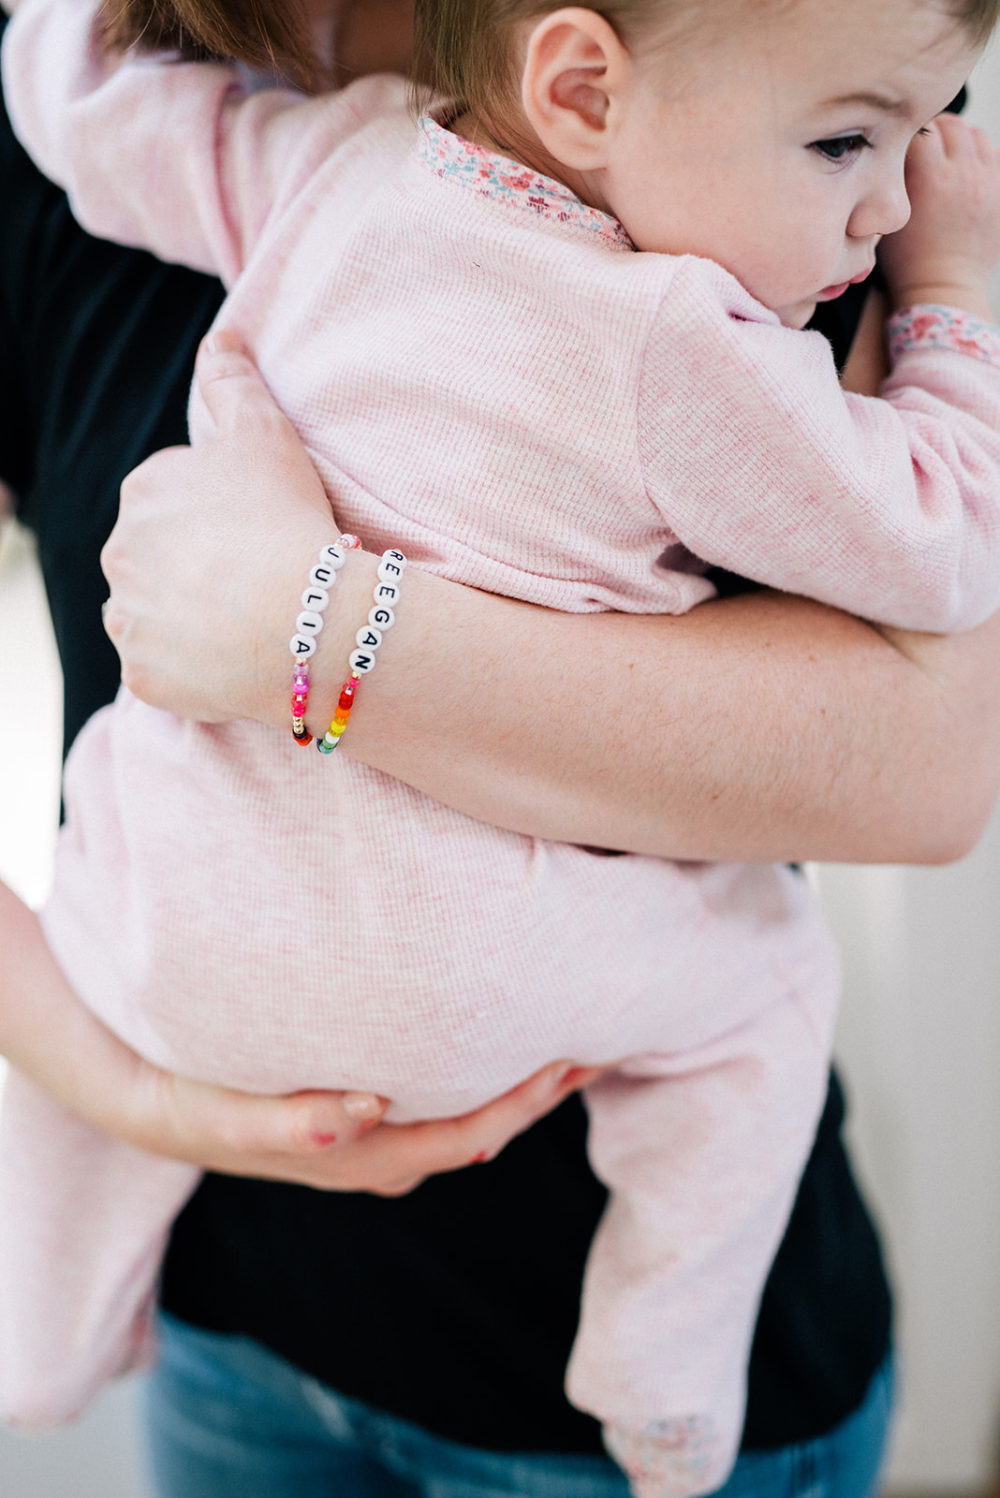 Lifestyle blogger Candace Cottet of Me & Reegs feature Sloane + Bari custom jewelry for mommy and me